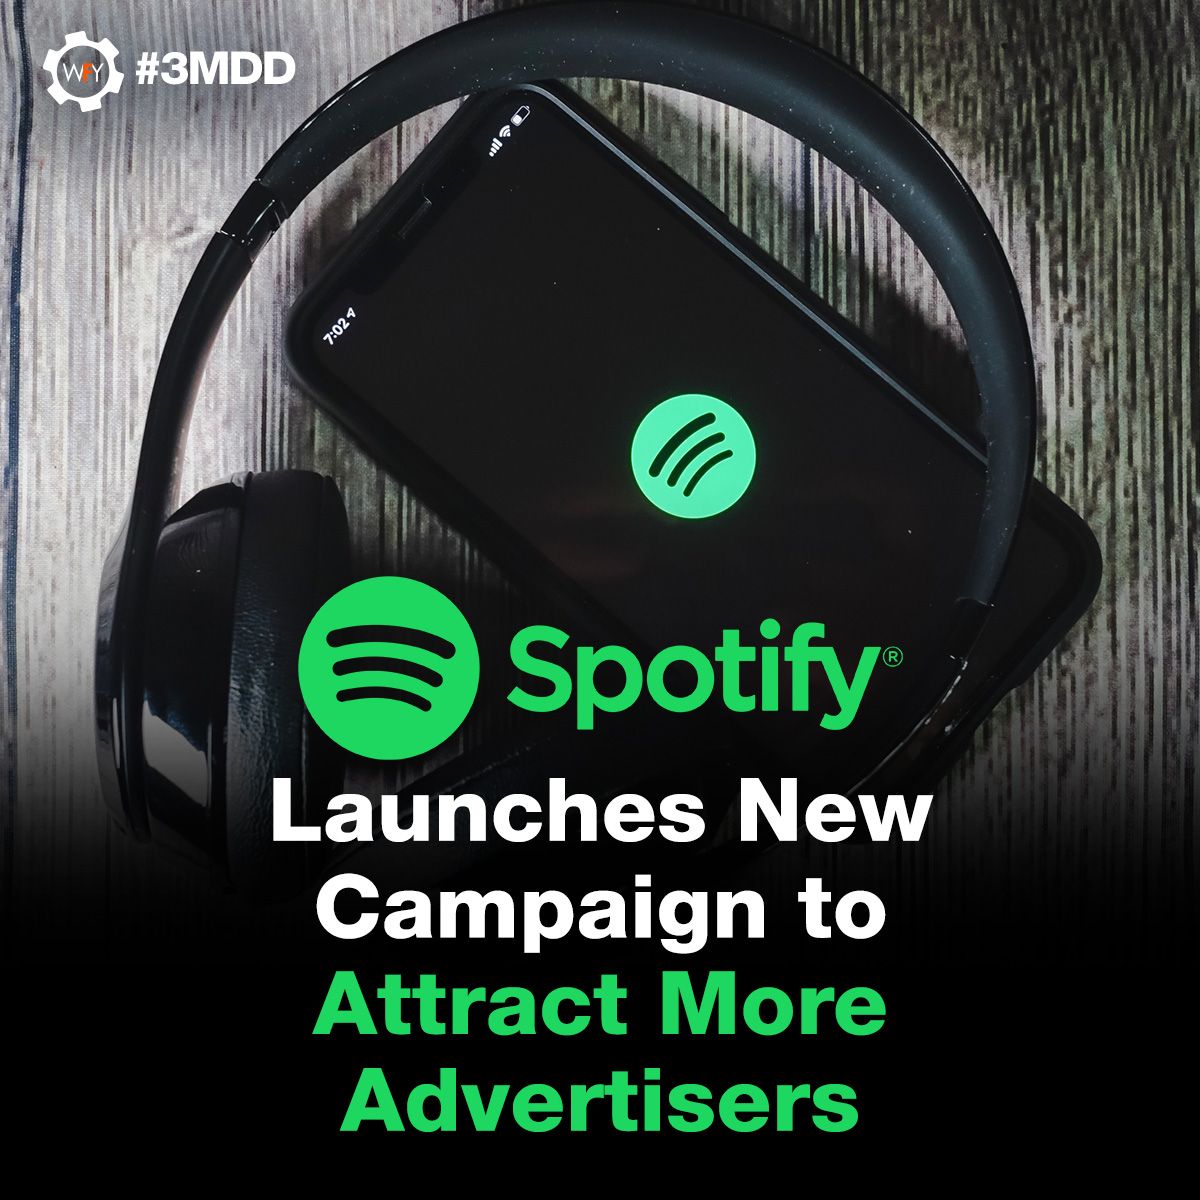 Spotify Launches New Campaign to Attract More Advertisers